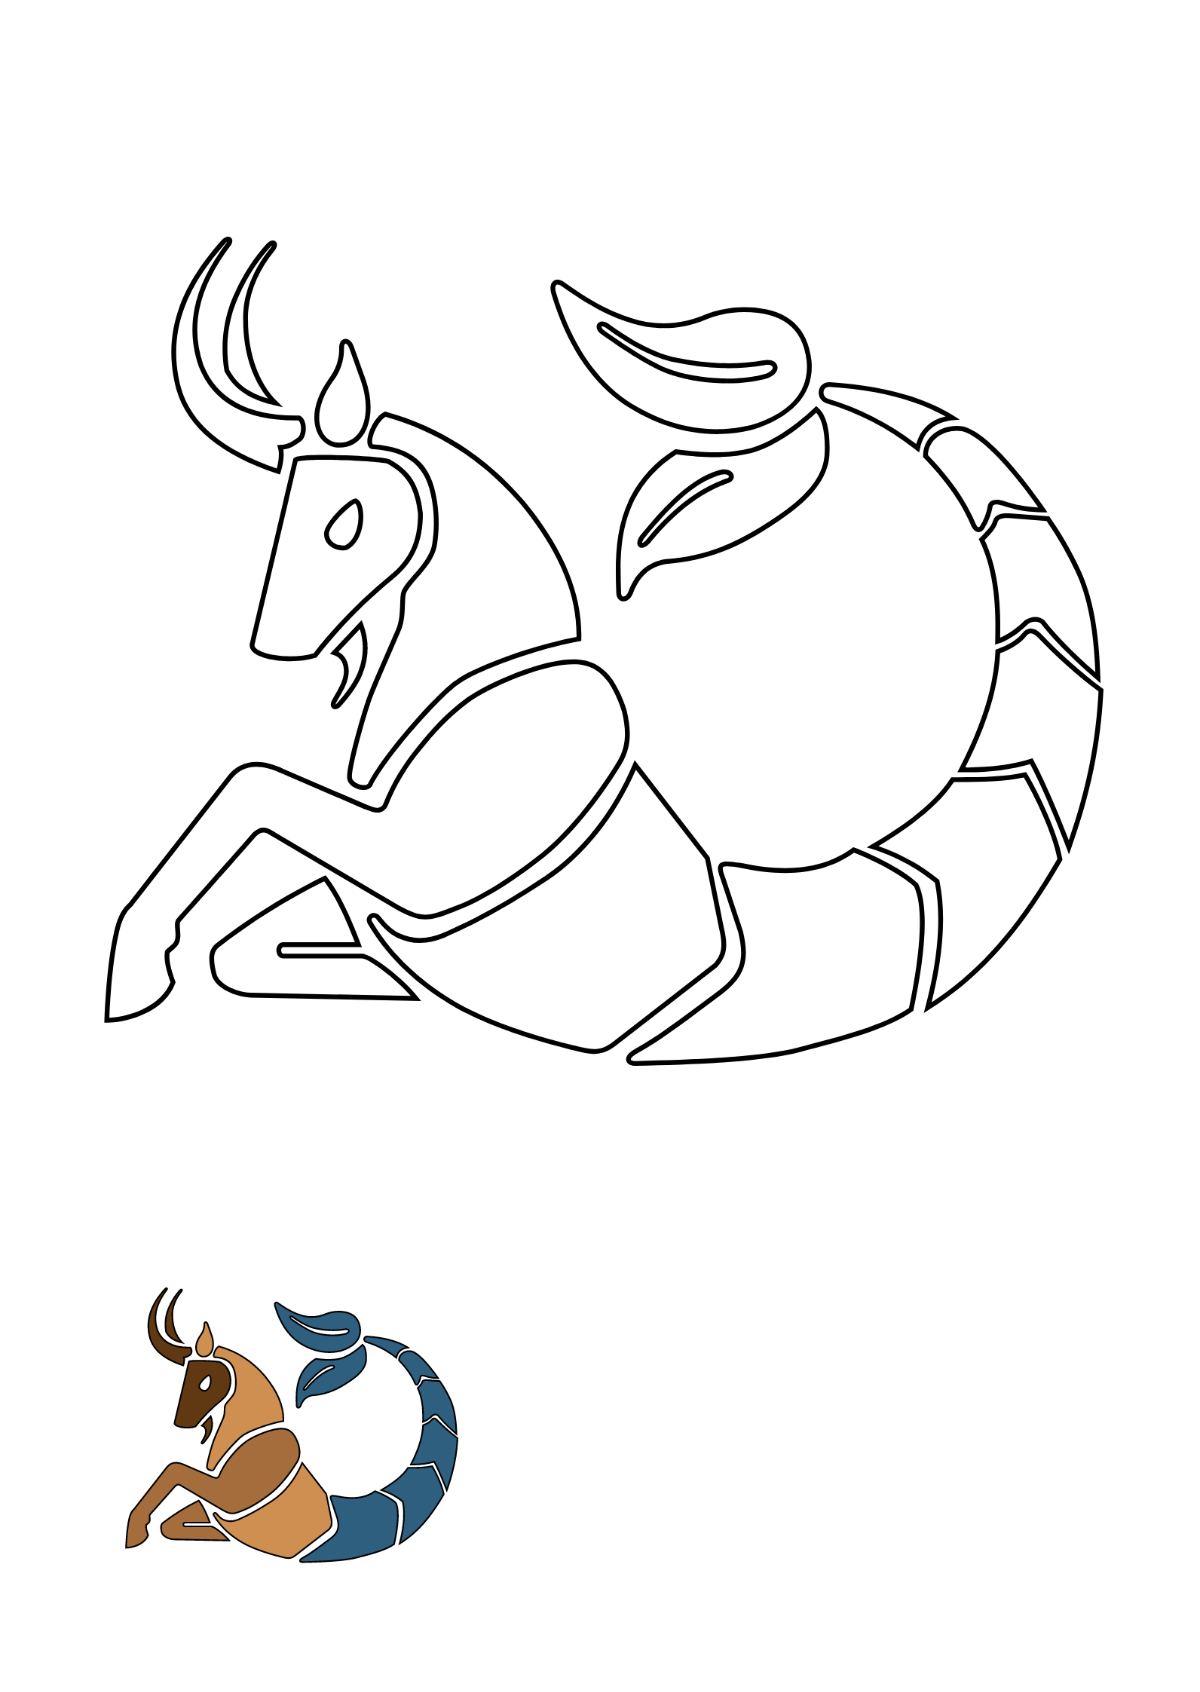 Sea Goat coloring page Template